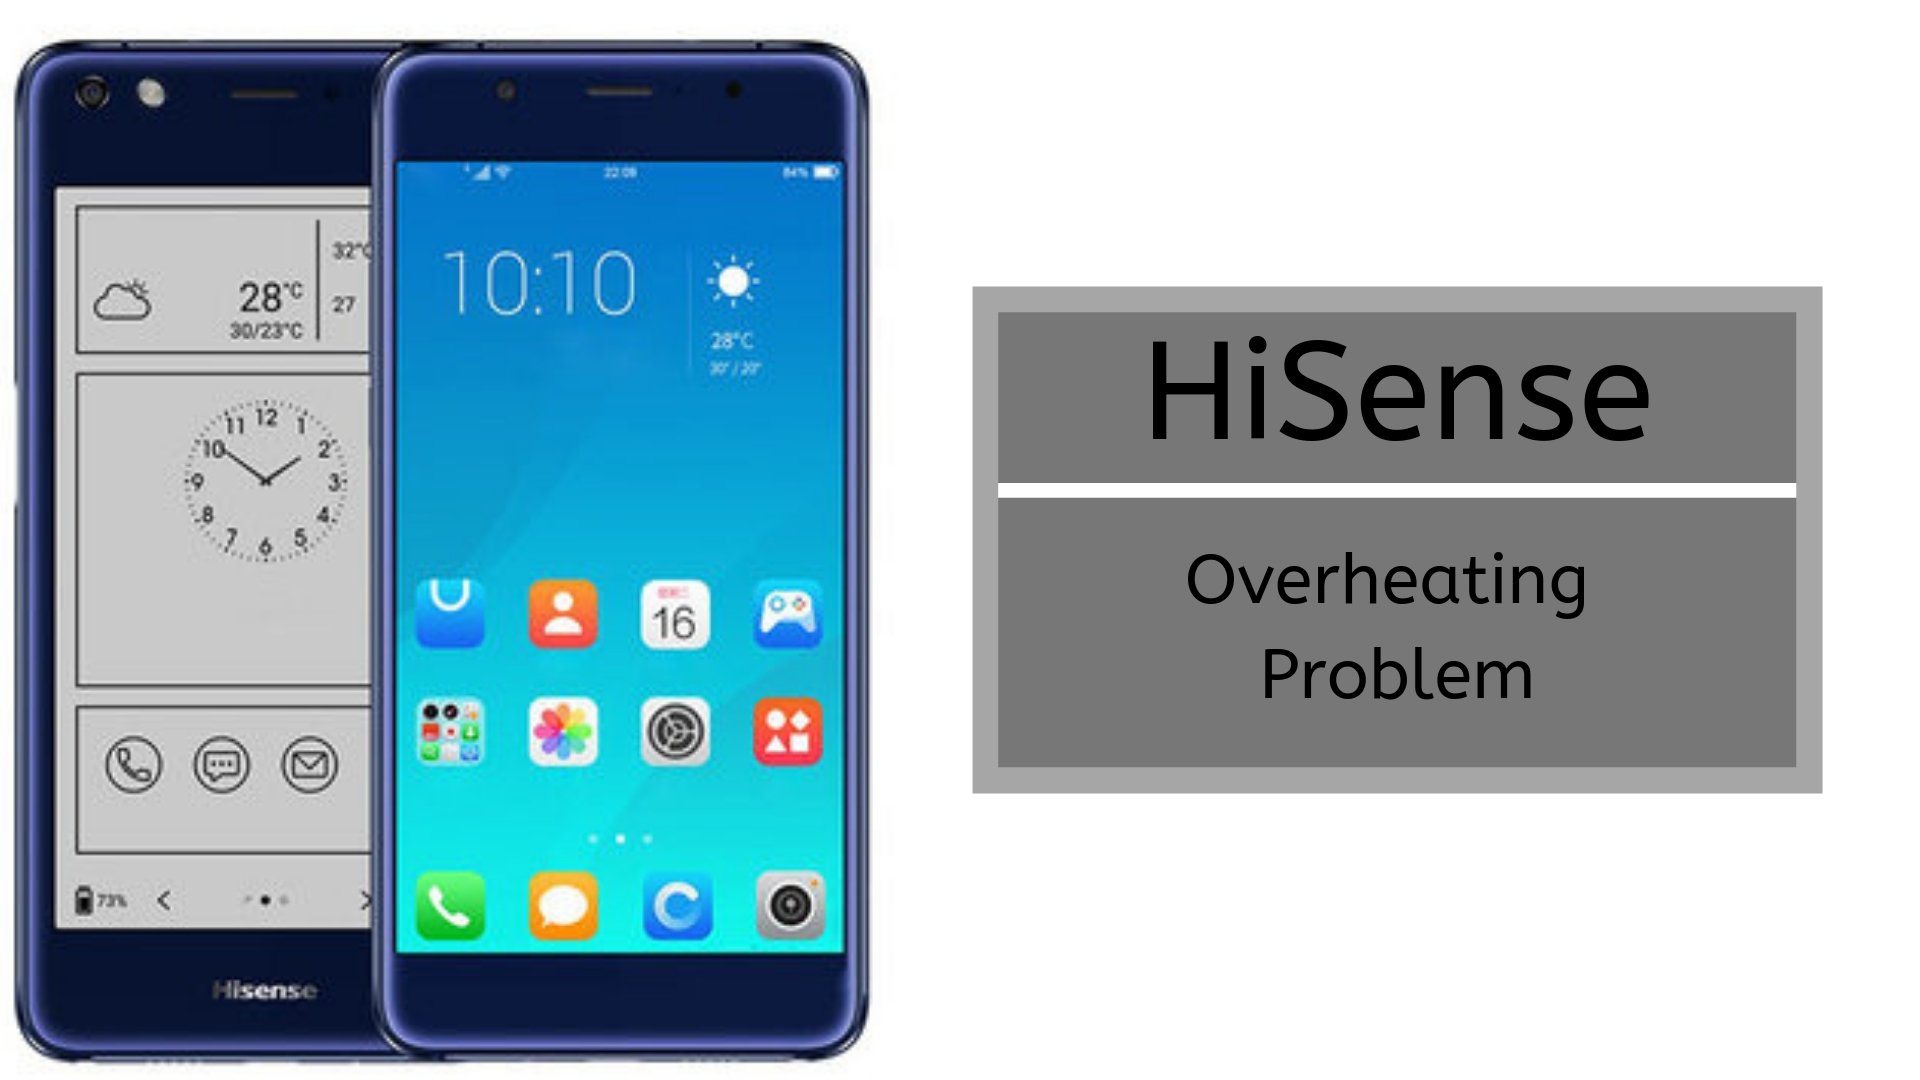 How To Fix Hisense Overheating Problem - Troubleshooting Fix & Tips